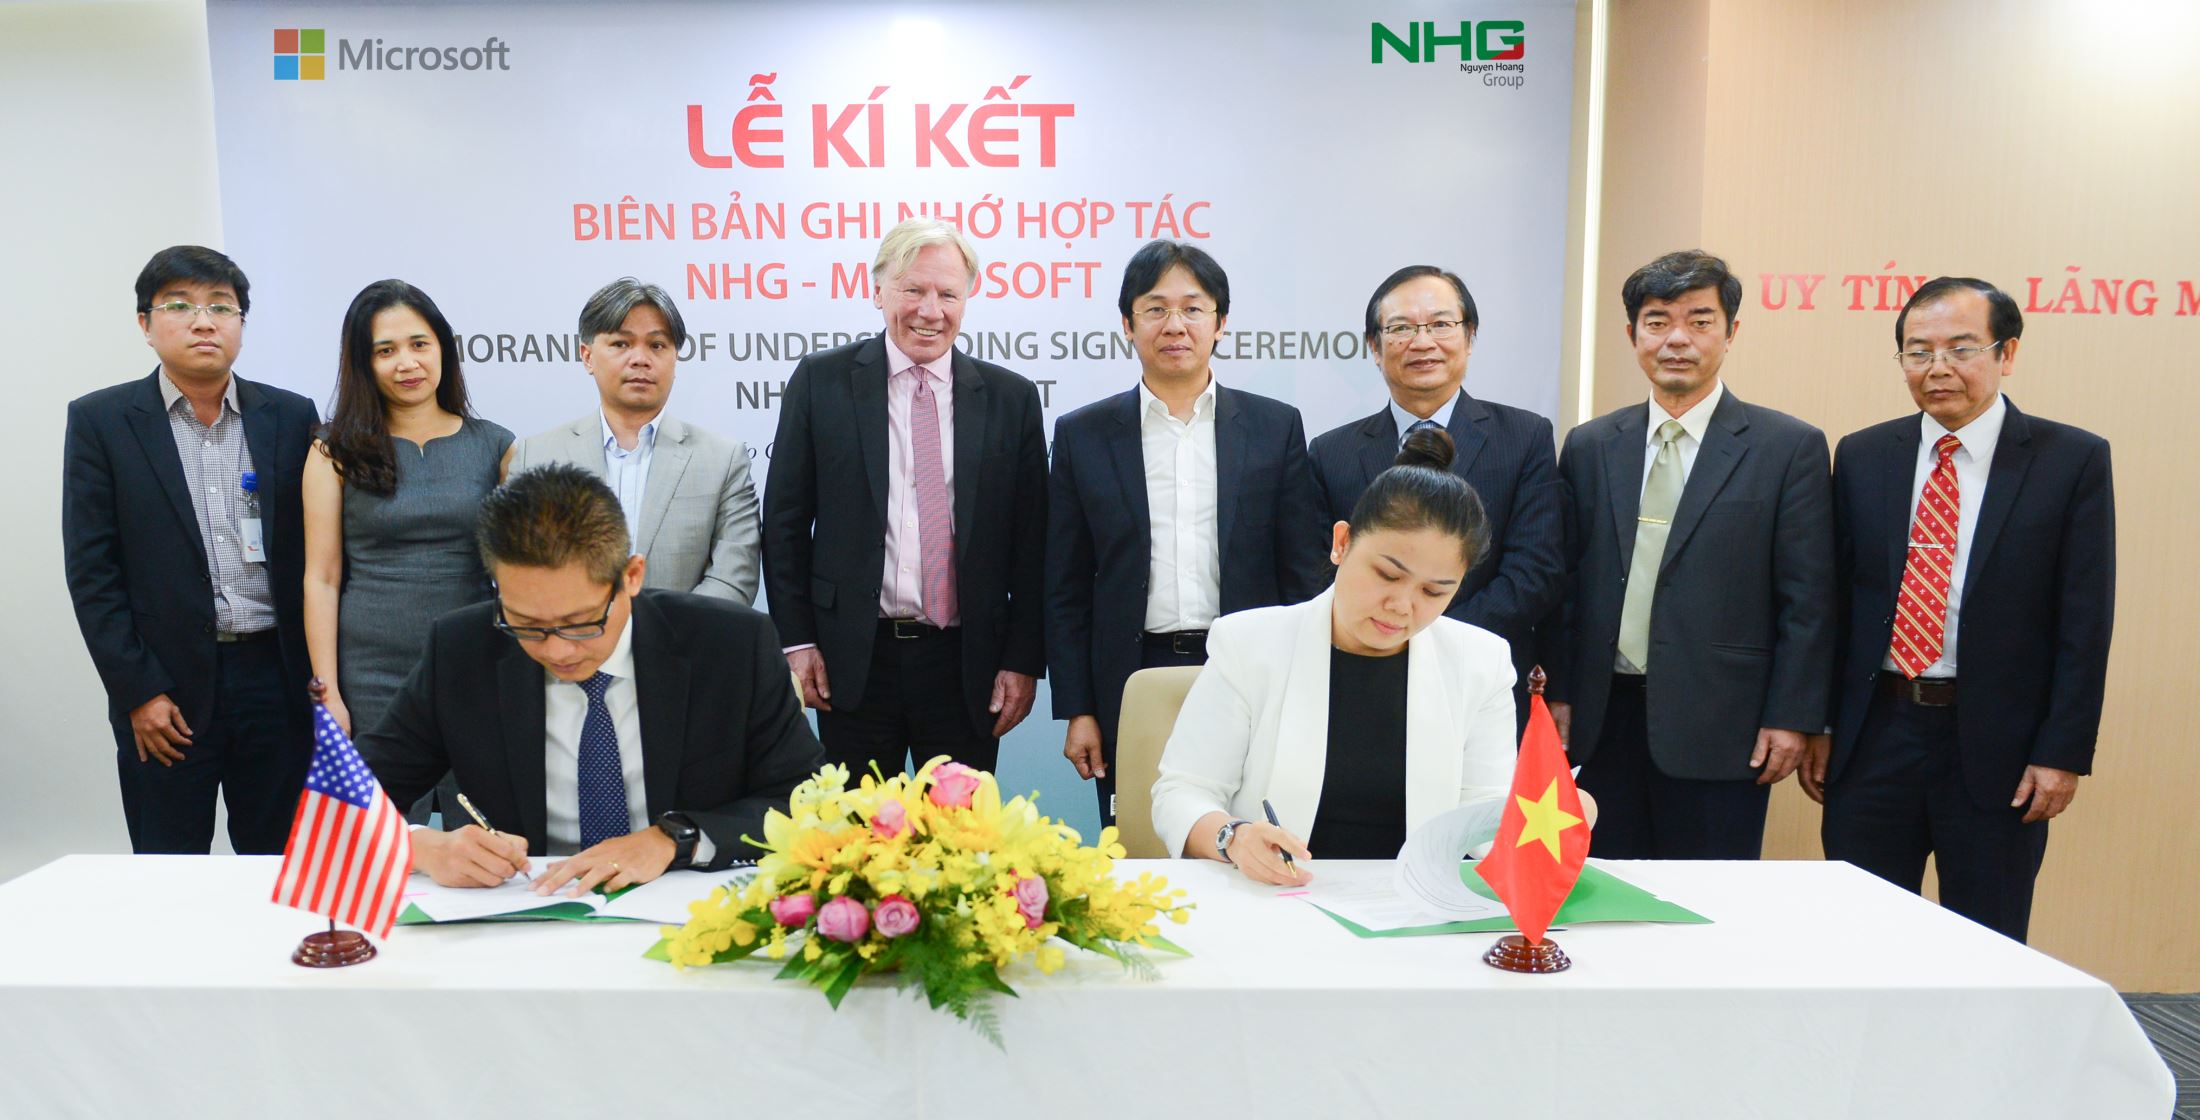 Ms. Hoang Nguyen Thu Thao, CEO of NHG and Mr. Vu Minh Tri, General Director of Microsoft Vietnam constructing the signing ceremony under the observation of NHG leaders and Microsoft leaders.